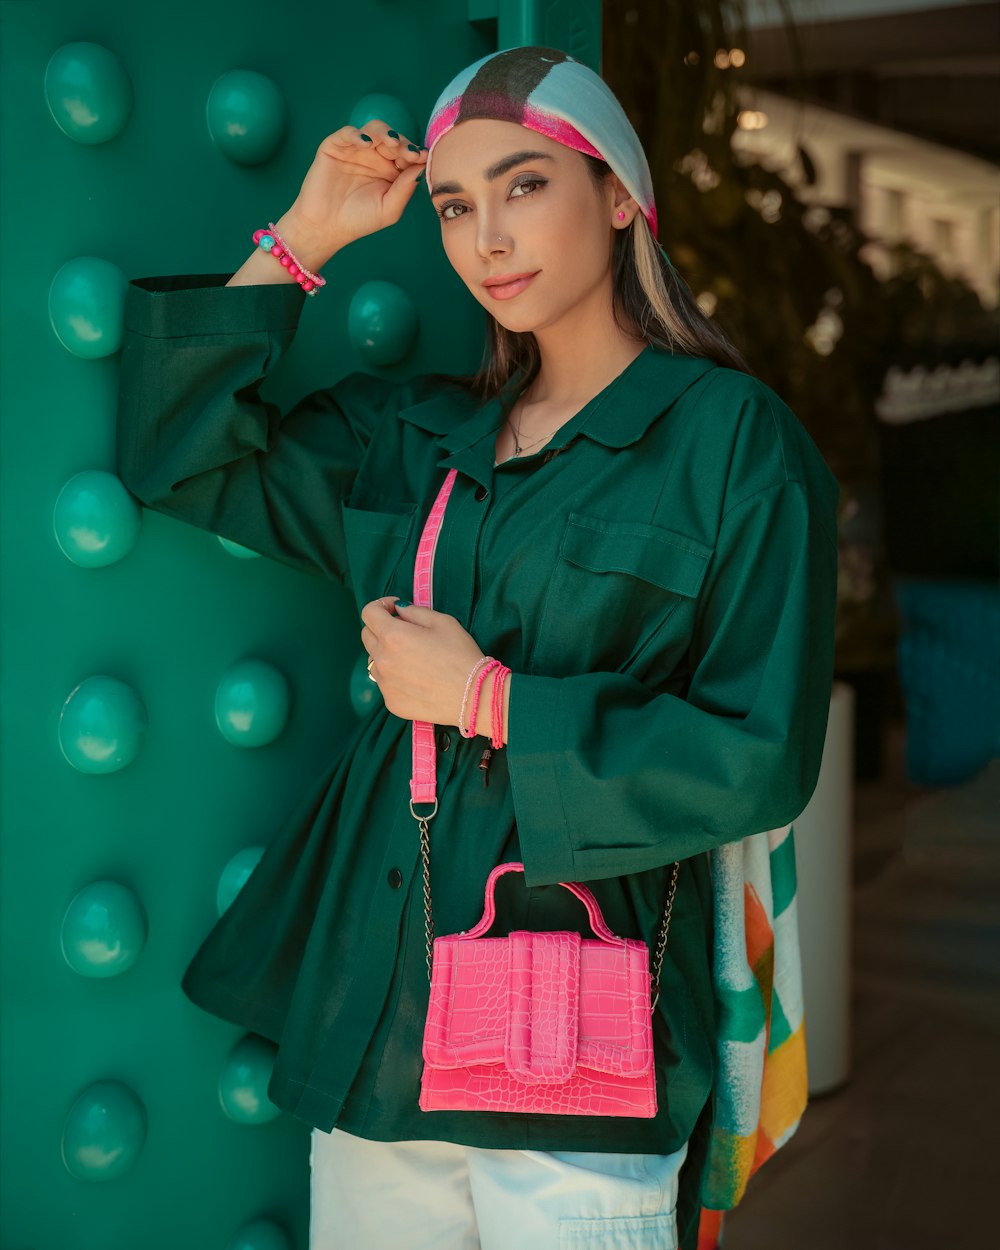 a woman in a green shirt holding a pink purse